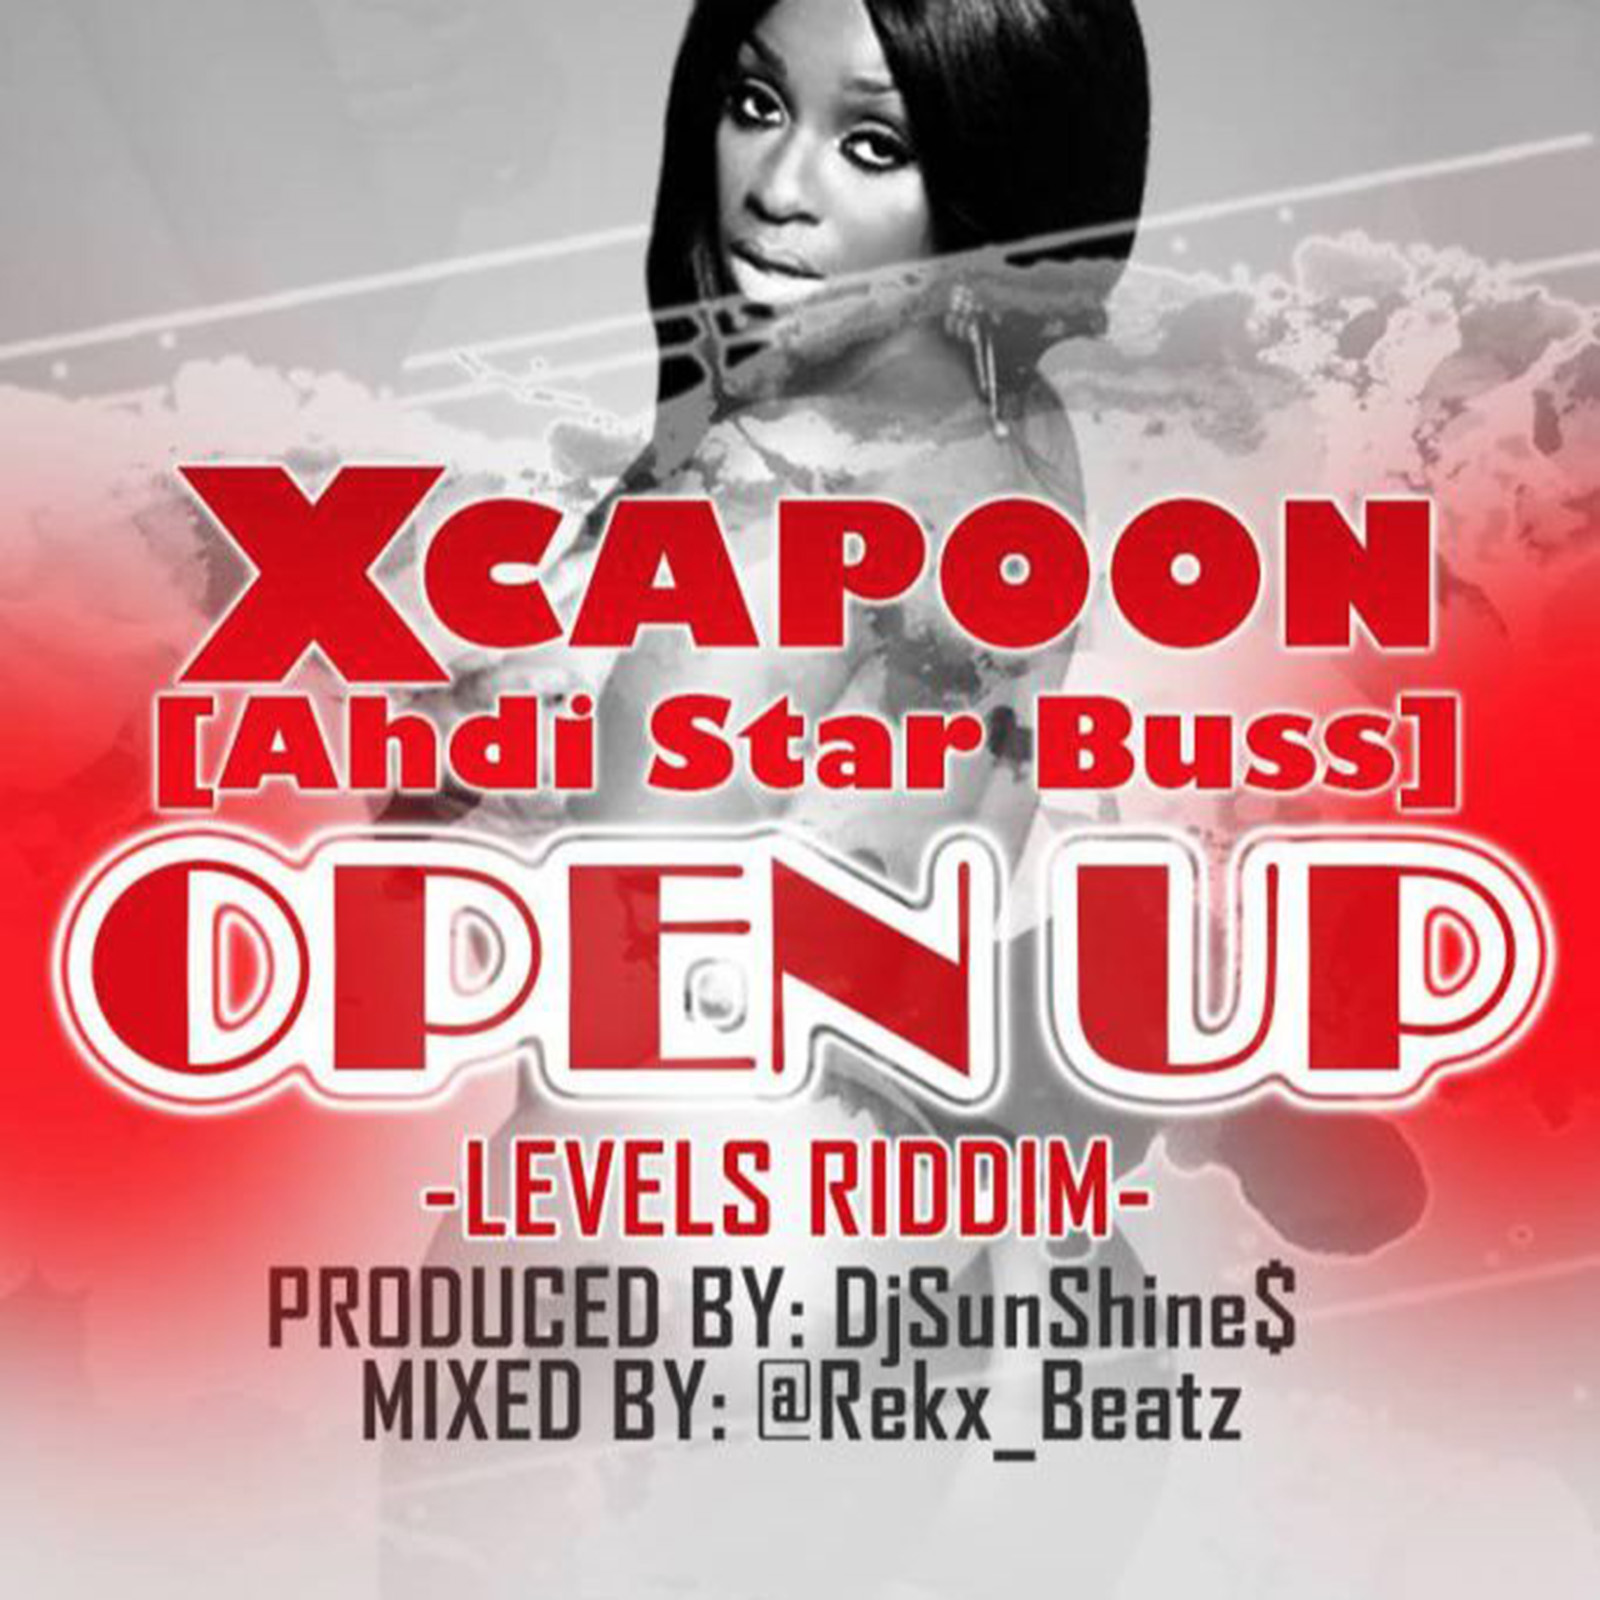 Open Up by Xcapoon (Adi Star Buss)